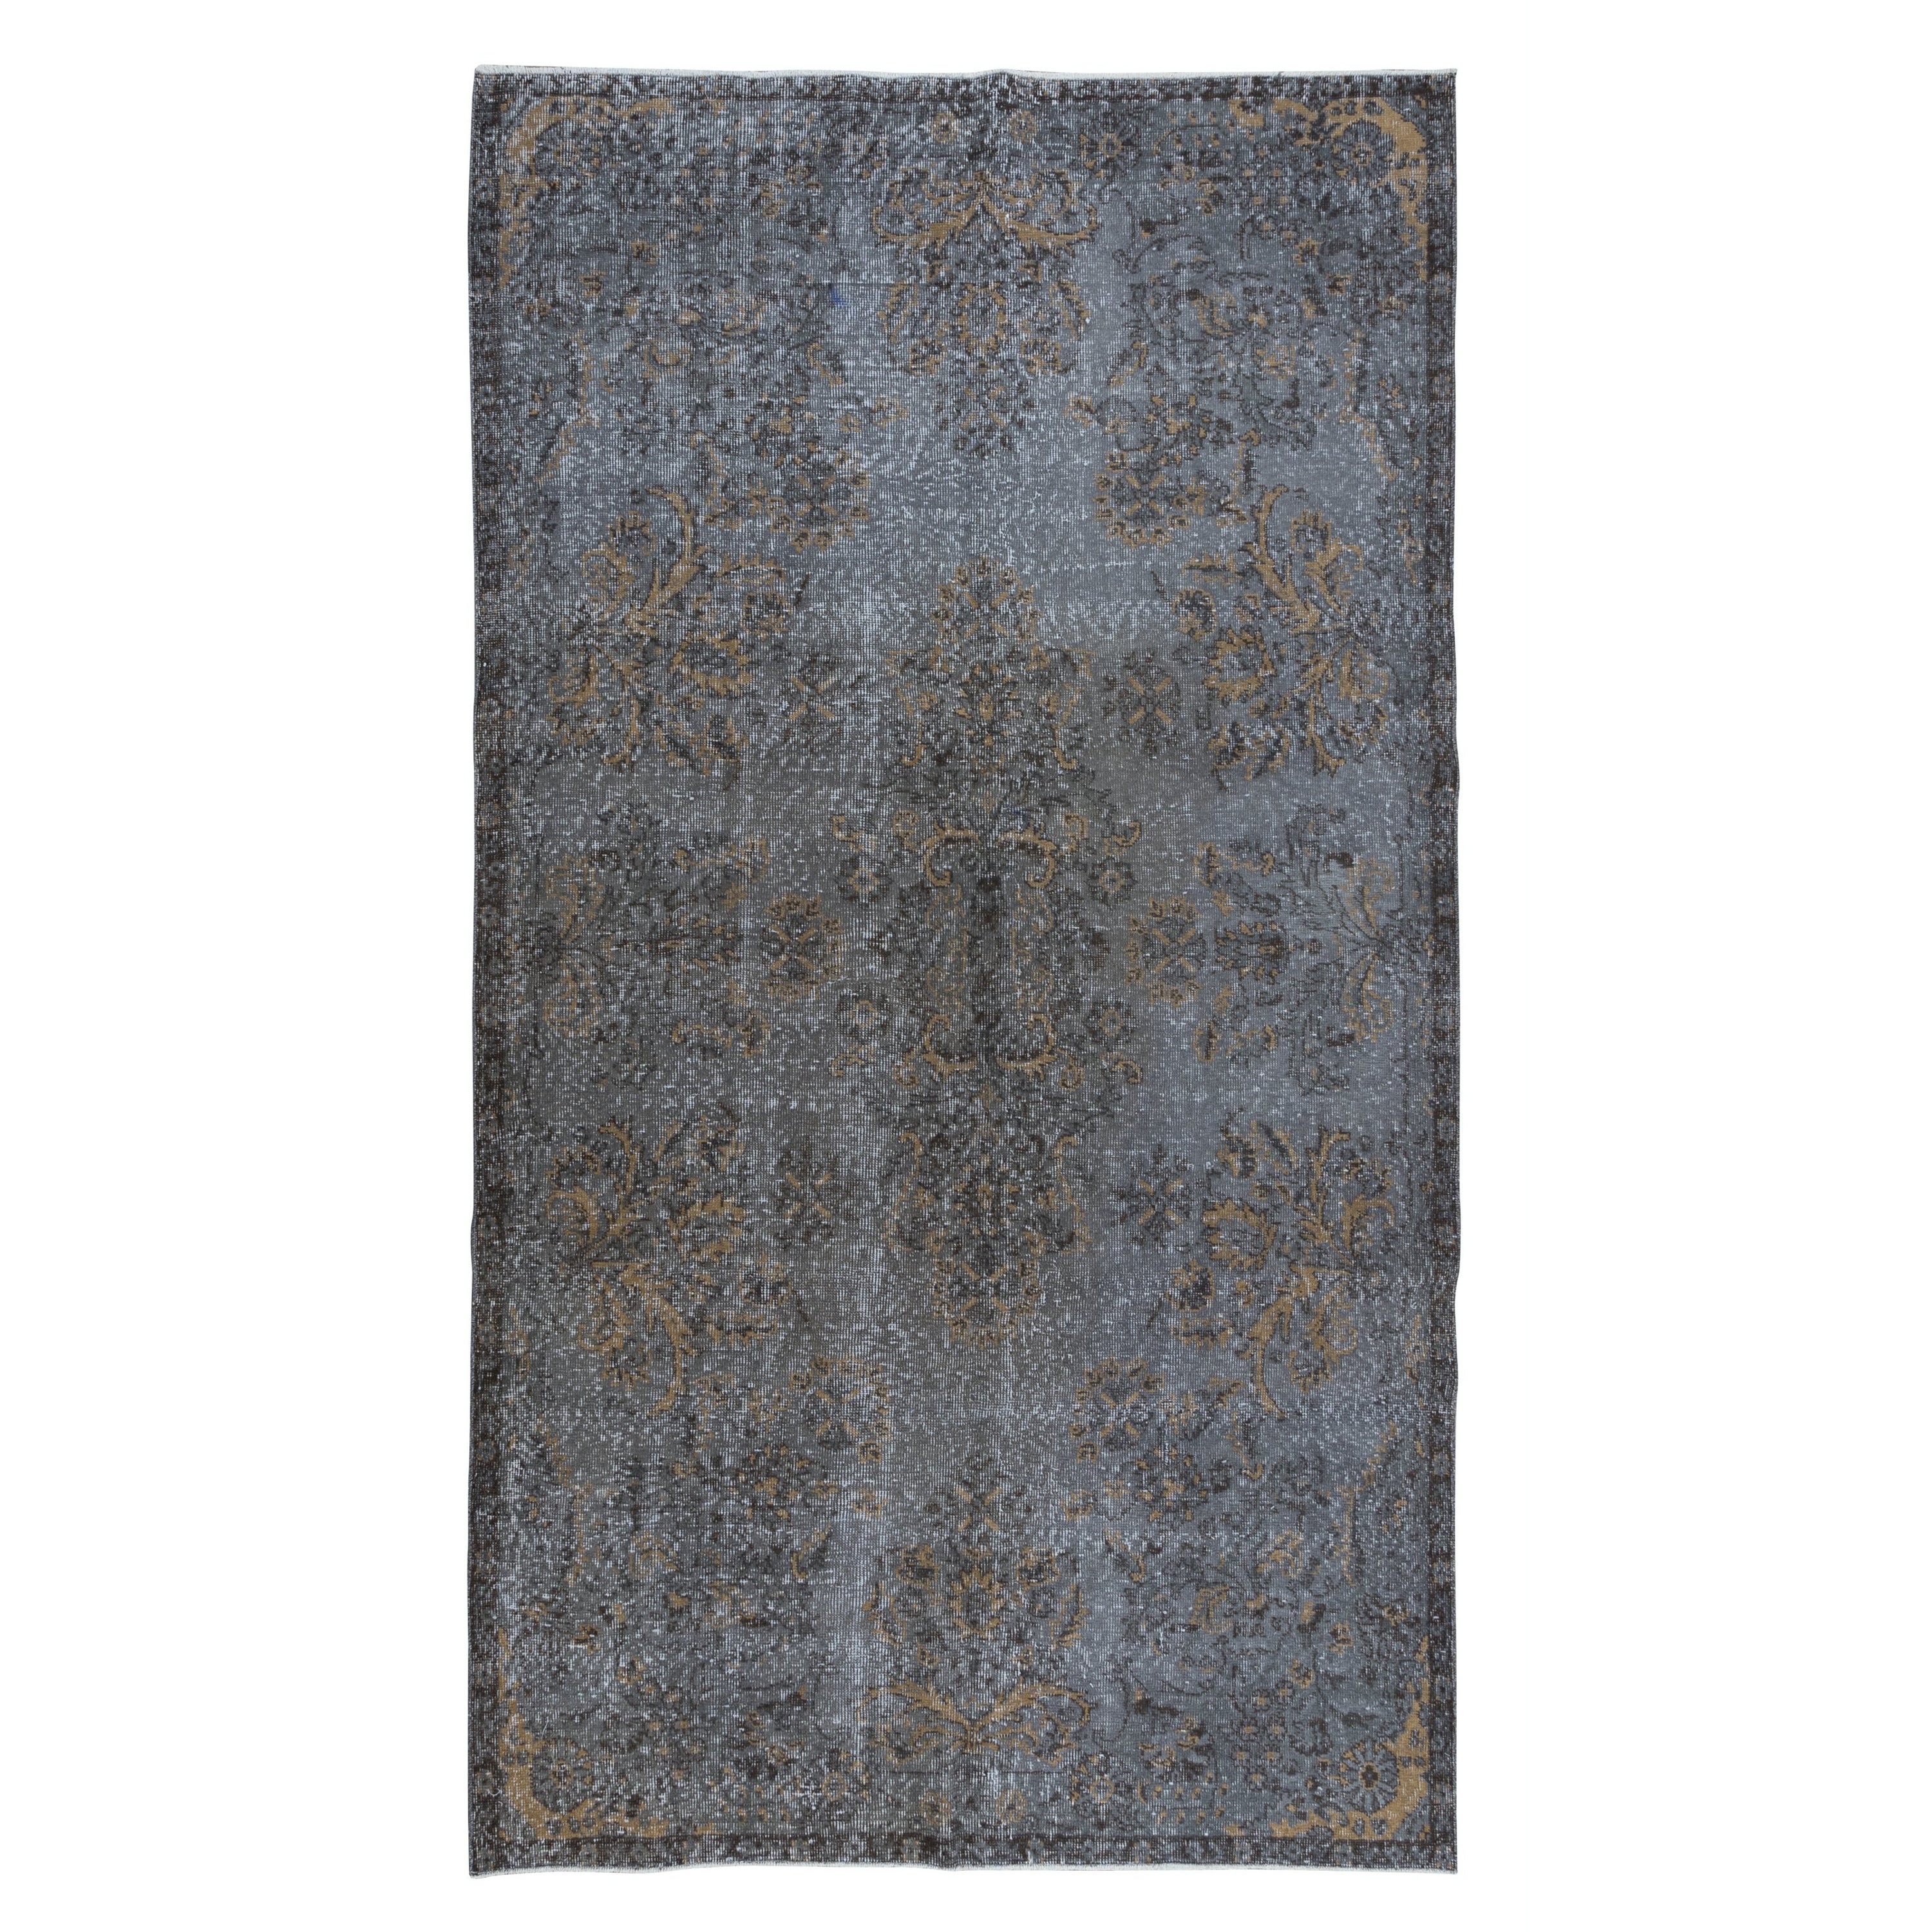 5.6x10 Ft Handmade Room Size Rug, Upcycled Turkish Carpet in Gray & Beige For Sale